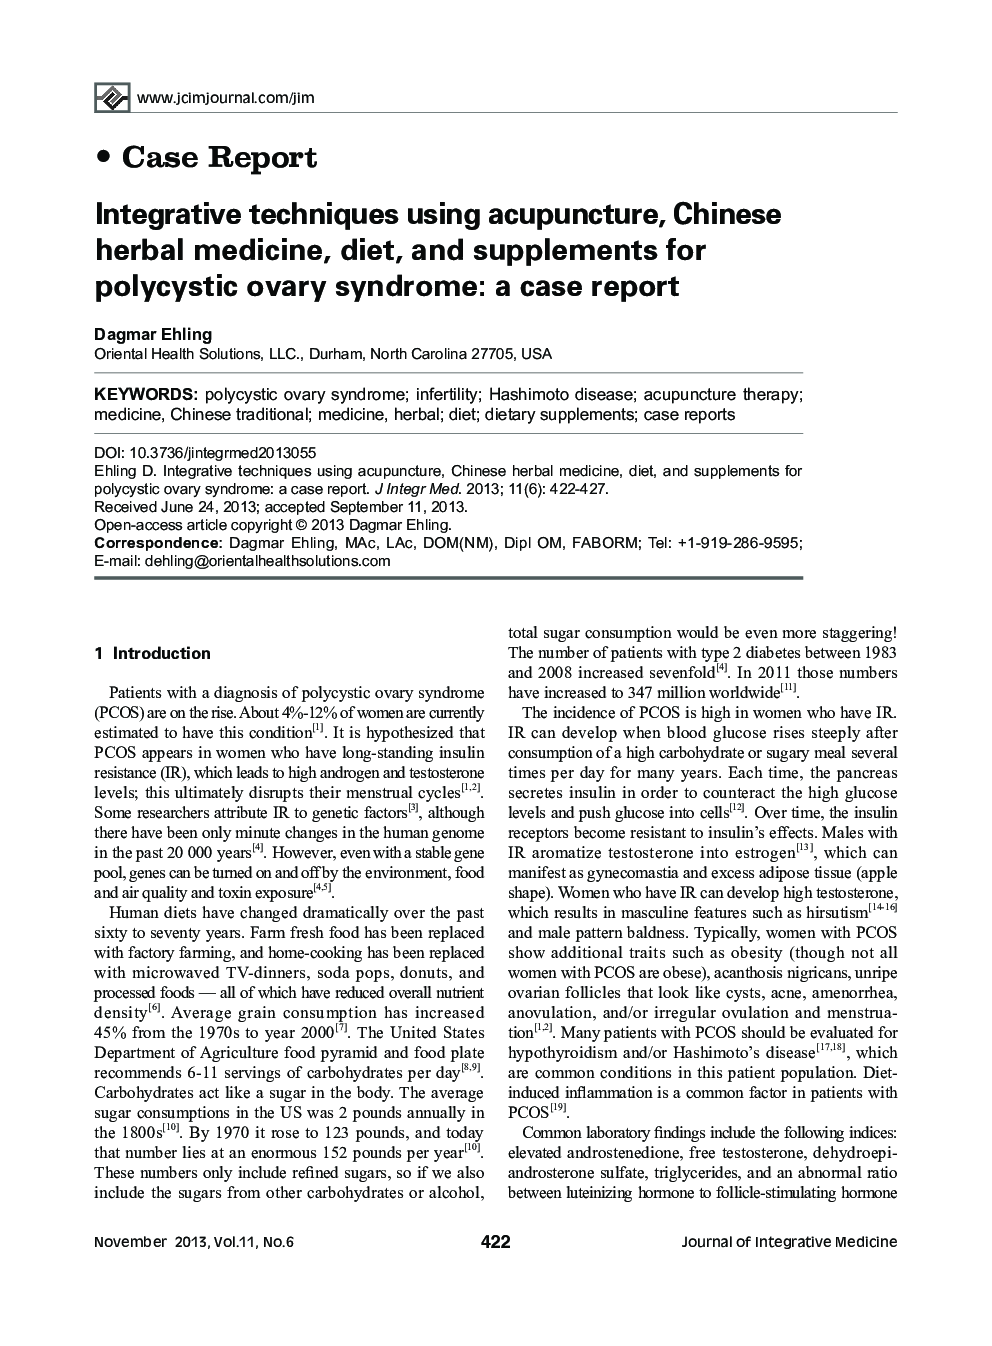 Integrative techniques using acupuncture, Chinese herbal medicine, diet, and supplements for polycystic ovary syndrome: a case report